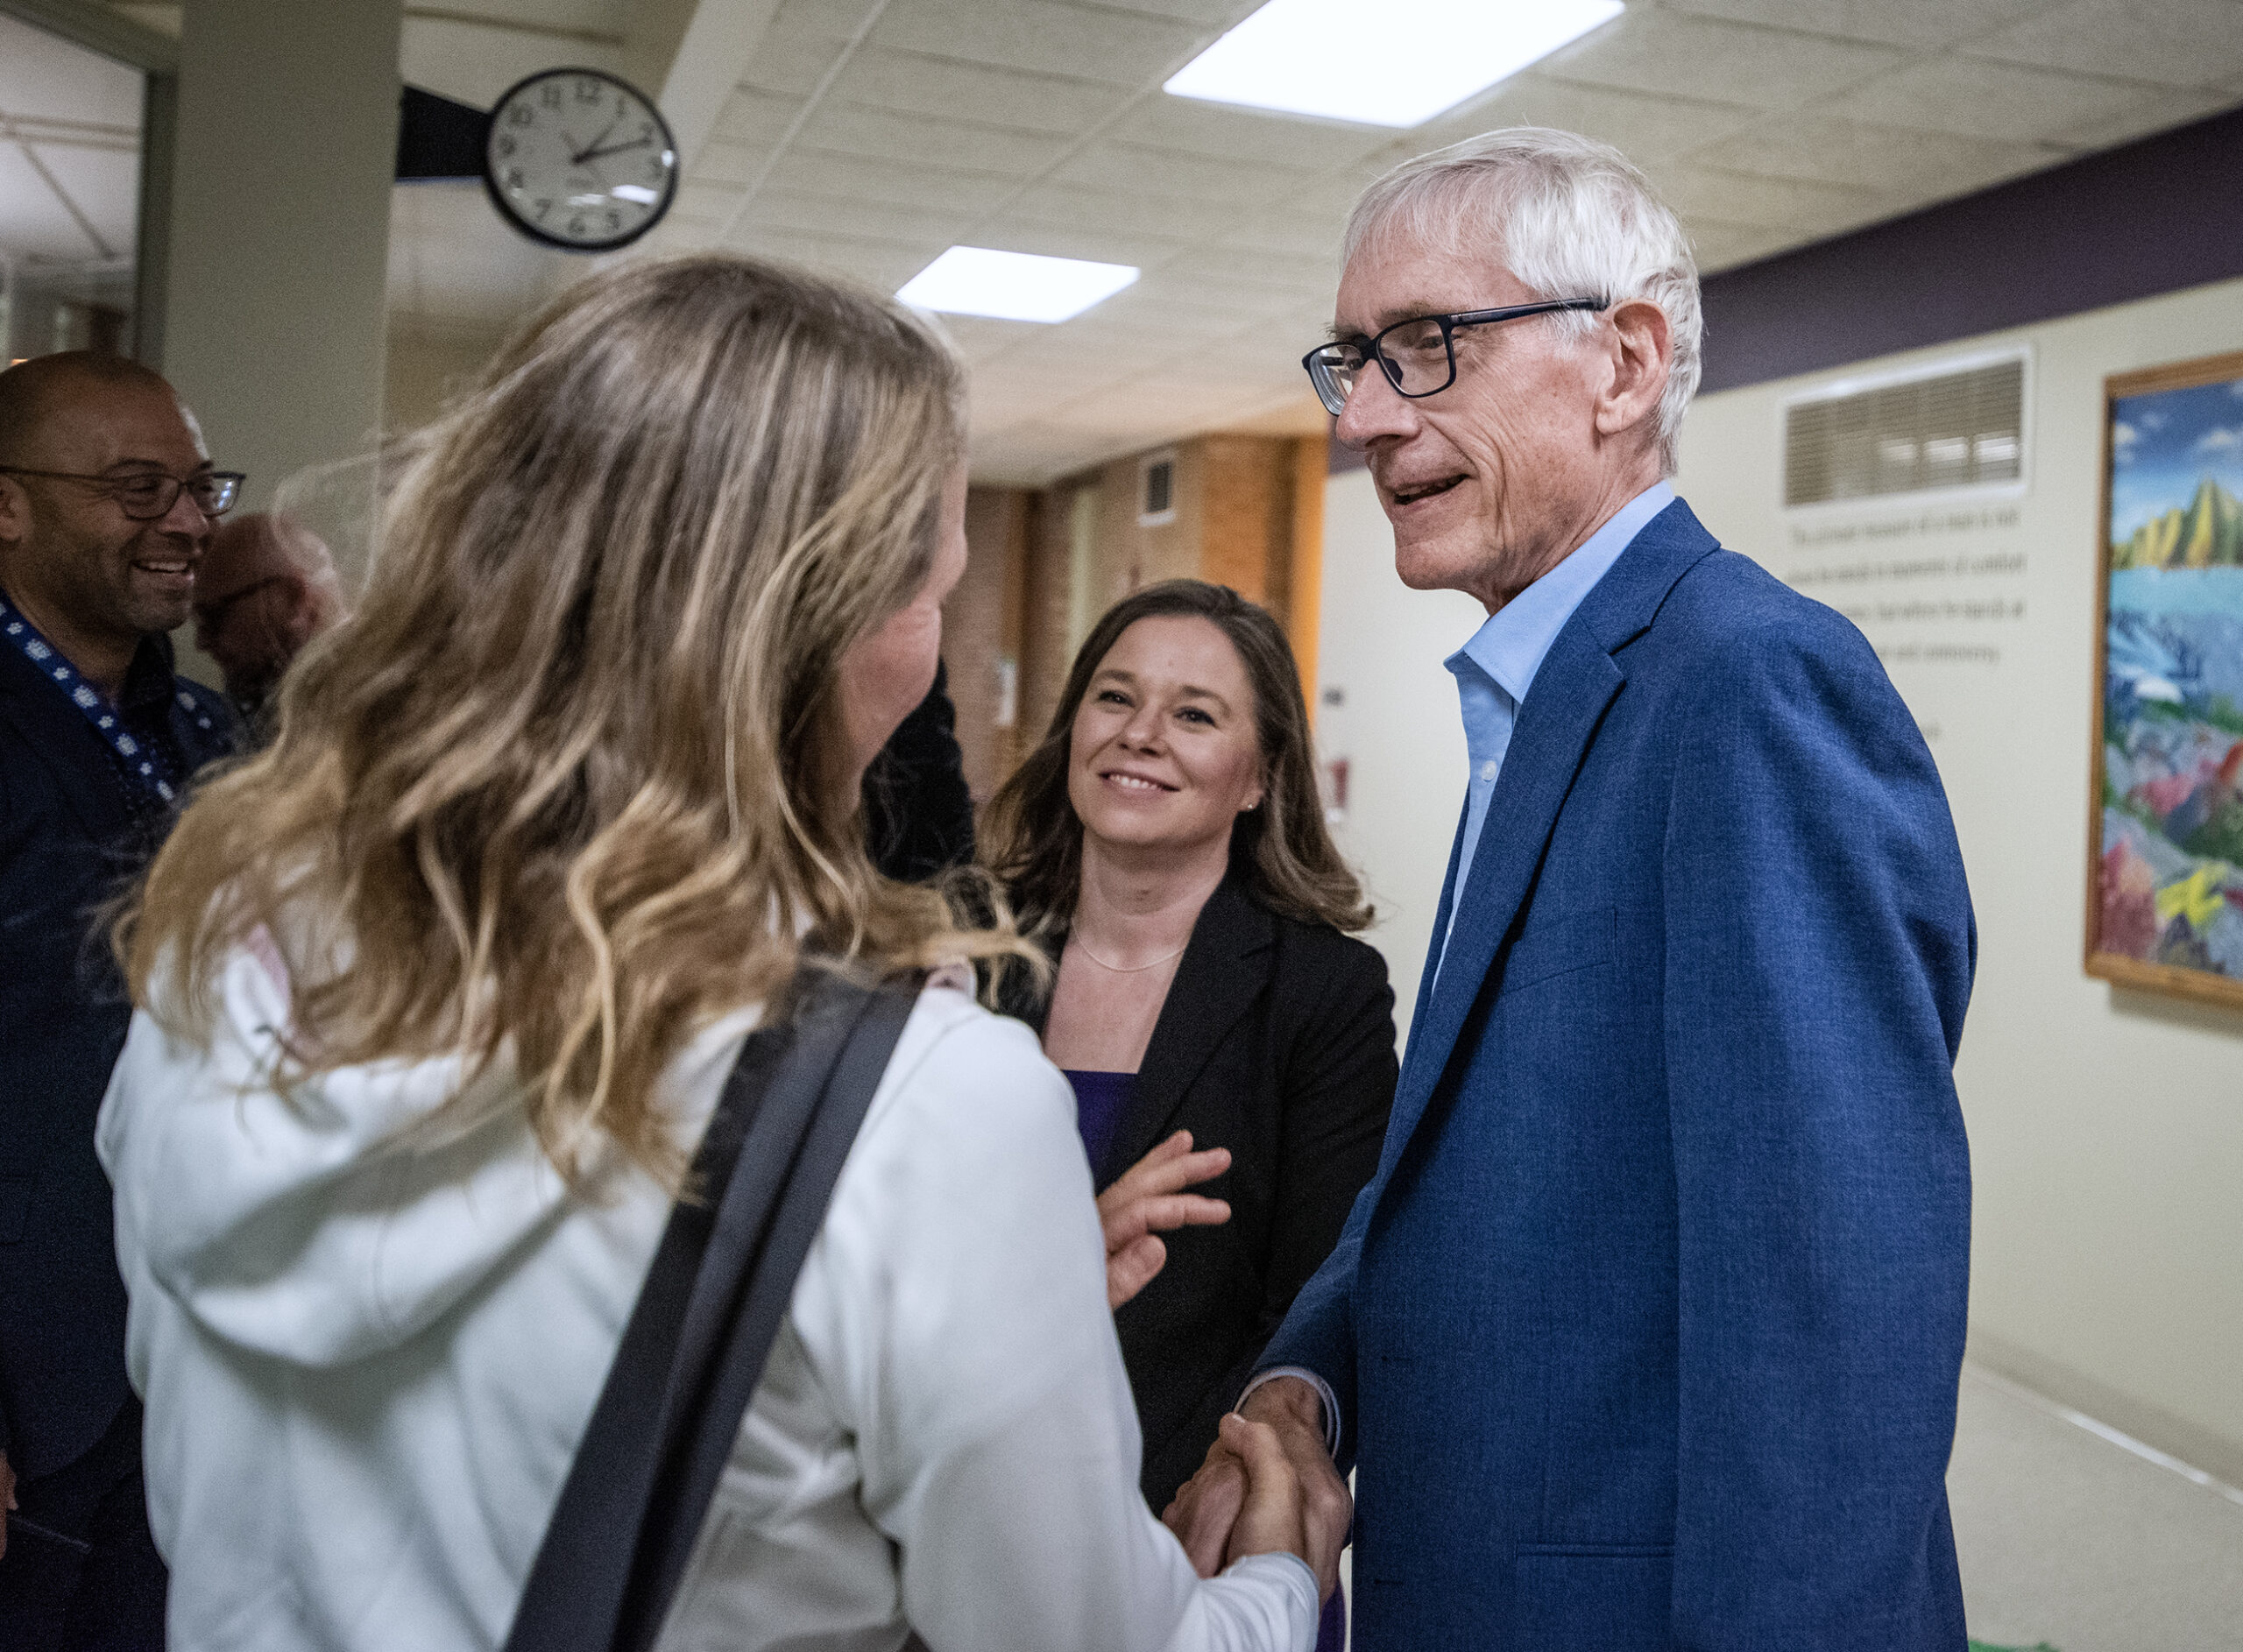 Gov. Tony Evers and Lt. Gov.-elect Rodriguez speak to a person in a school hallway.